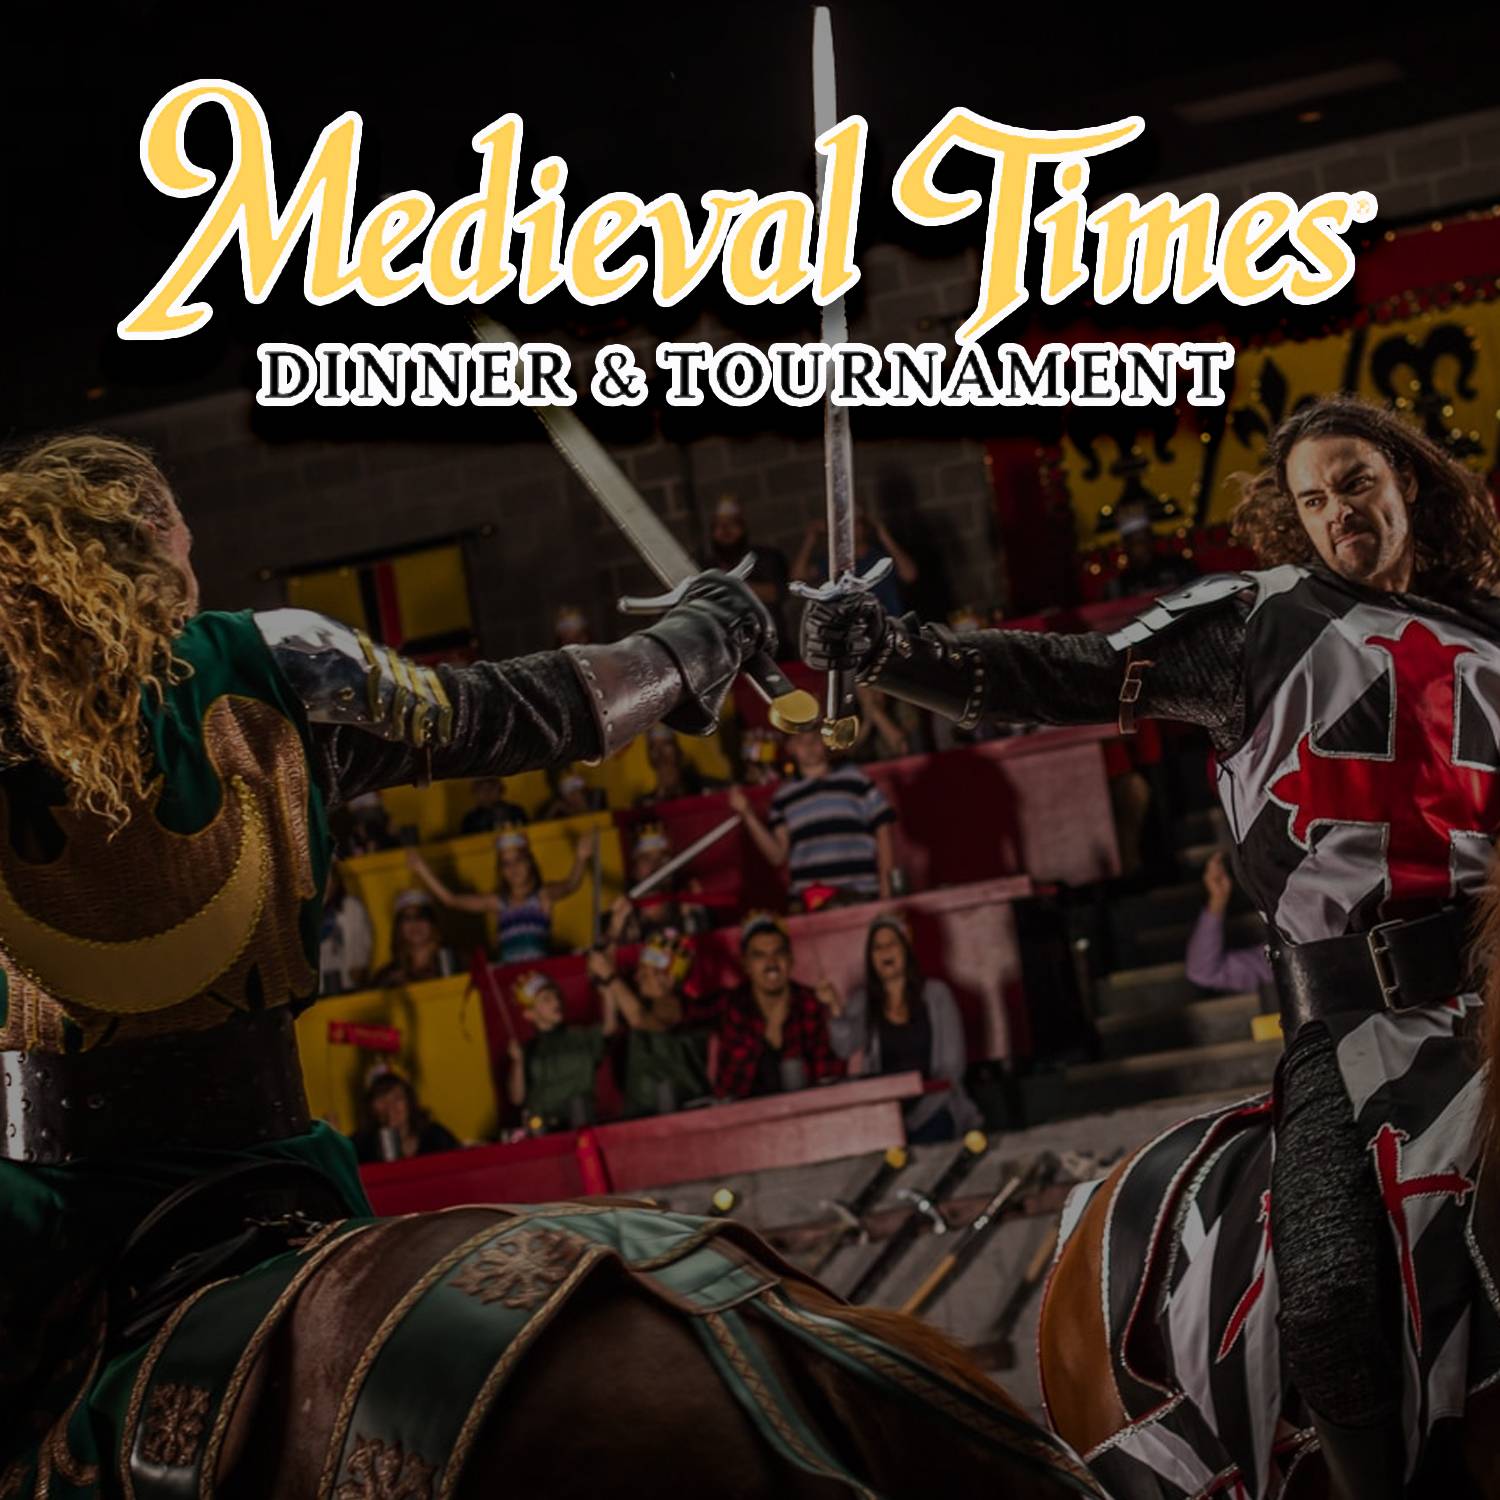 Medieval Times Dinner & Tournament Discounted Tickets